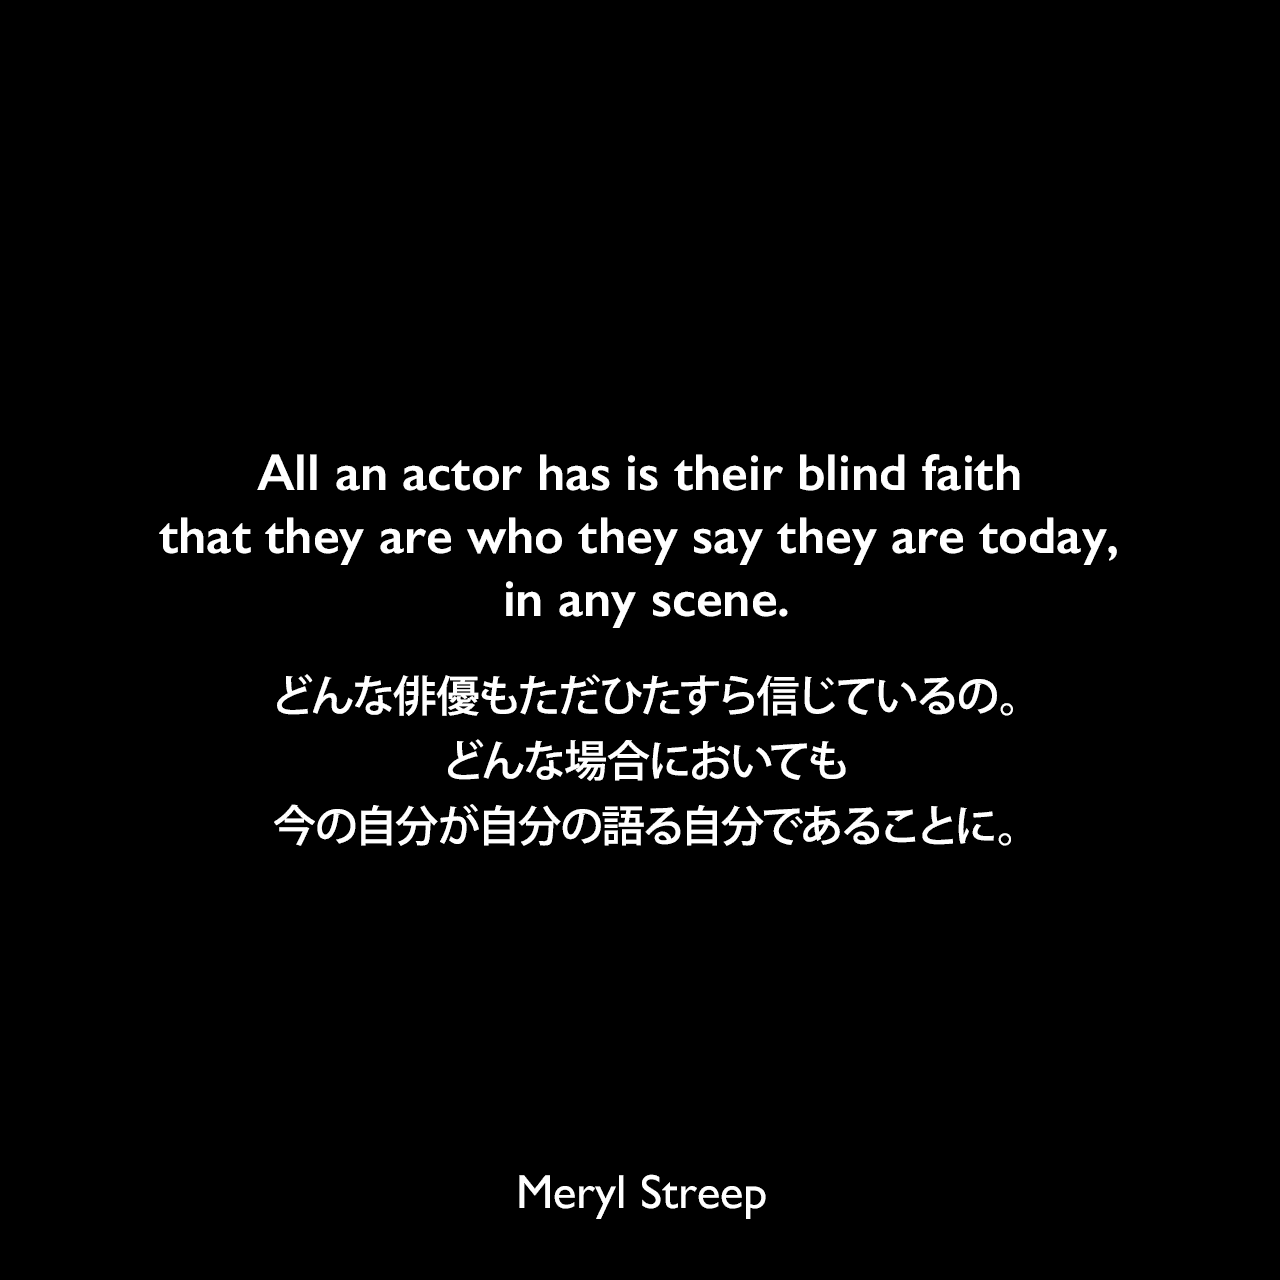 All an actor has is their blind faith that they are who they say they are today, in any scene.どんな俳優もただひたすら信じているの。どんな場合においても、今の自分が自分の語る自分であることに。Meryl Streep